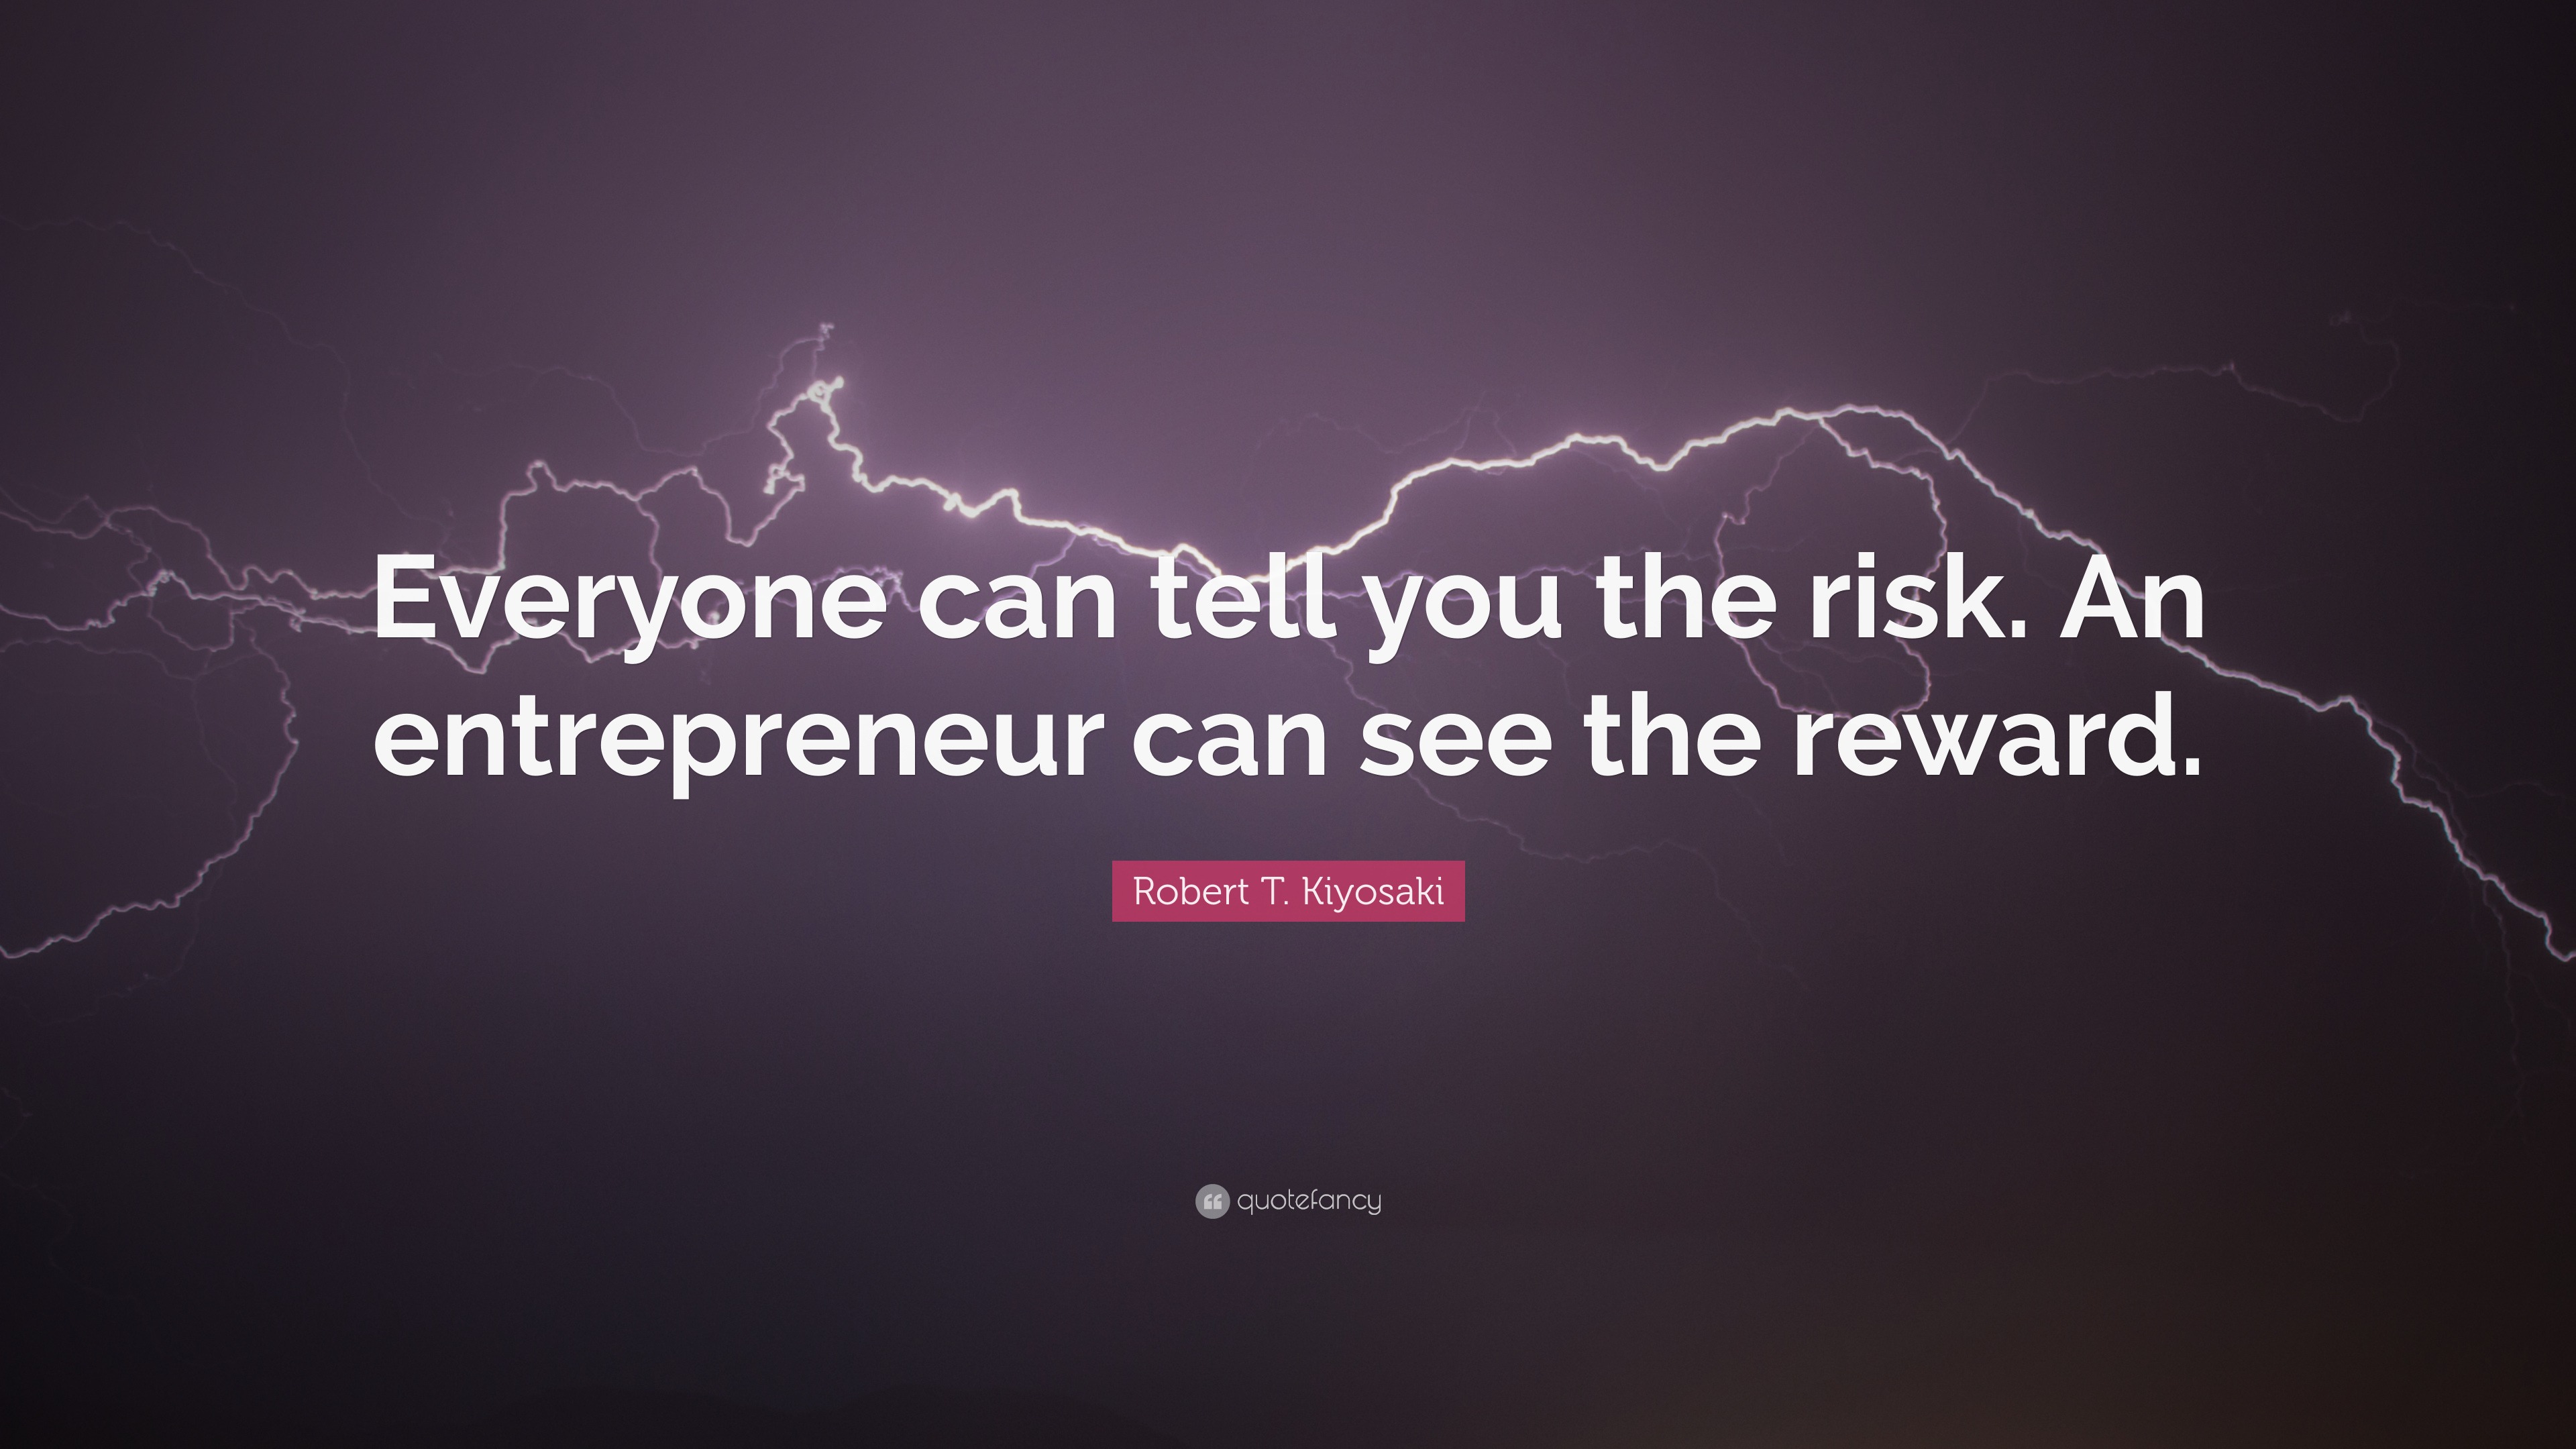 Robert T. Kiyosaki Quote: “Everyone can tell you the risk. An ...